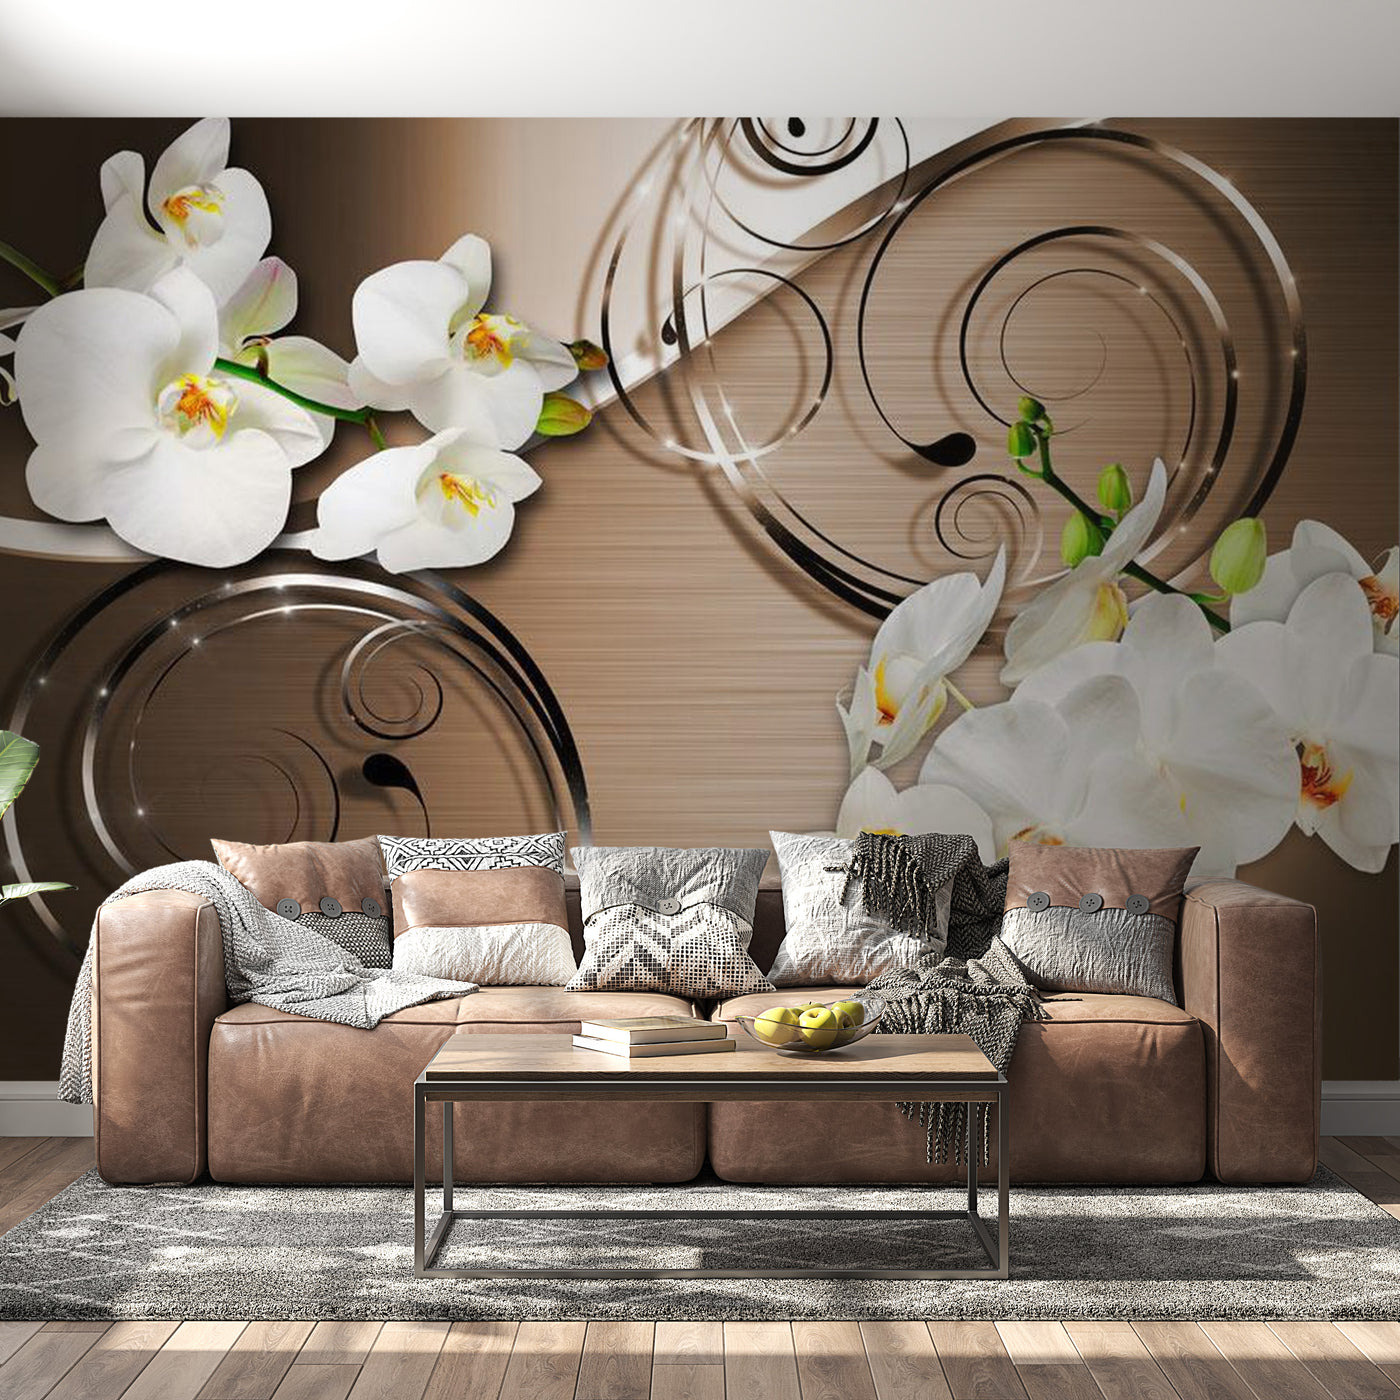 Peel & Stick Floral Wall Mural - Trust - Removable Wall Decals